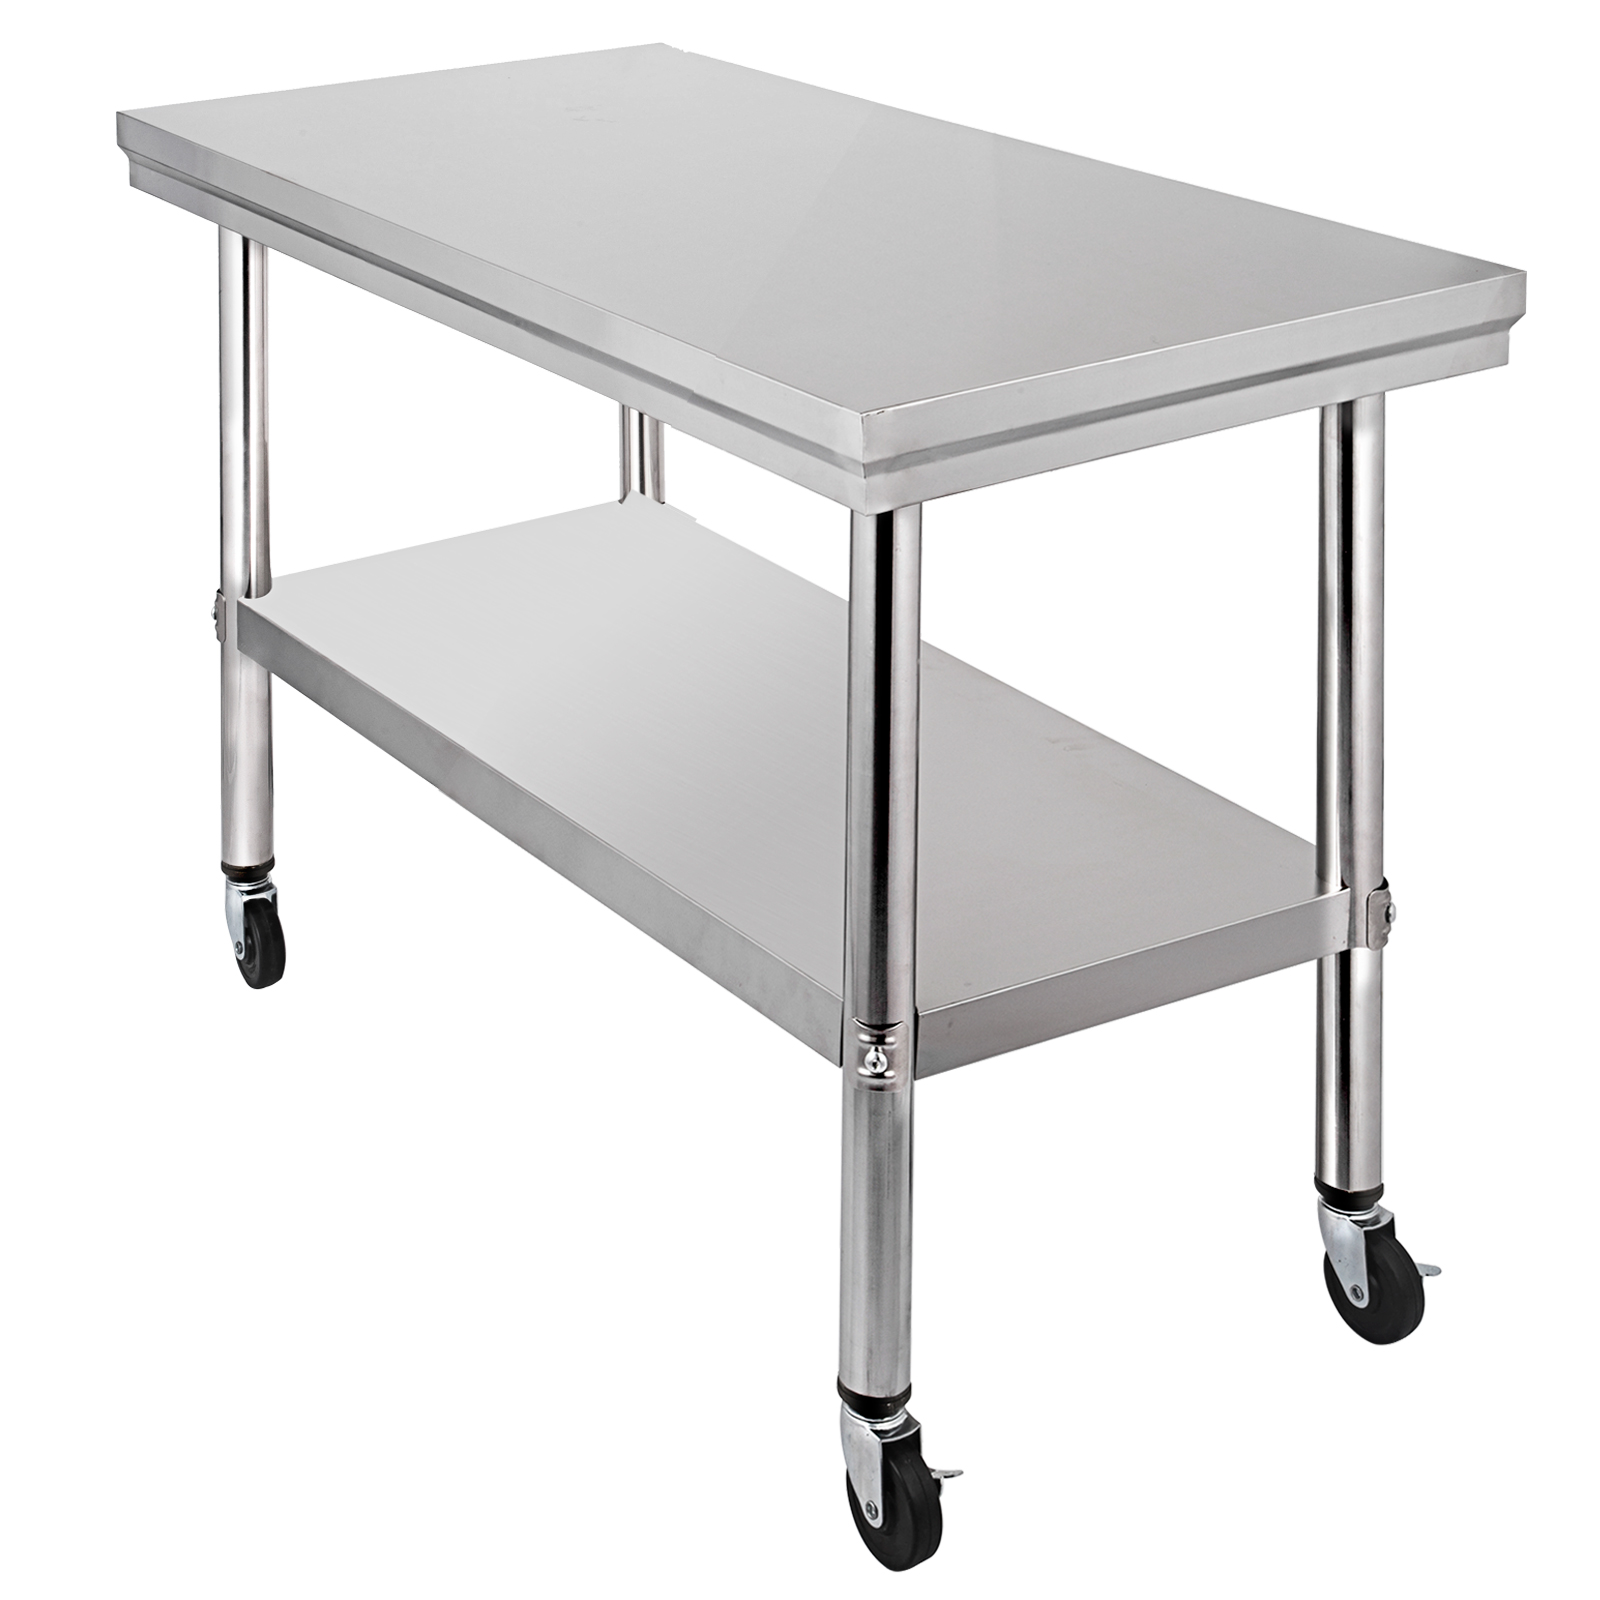 36x24 Stainless Steel Work Table 4 Casters Easy Cleaning ...